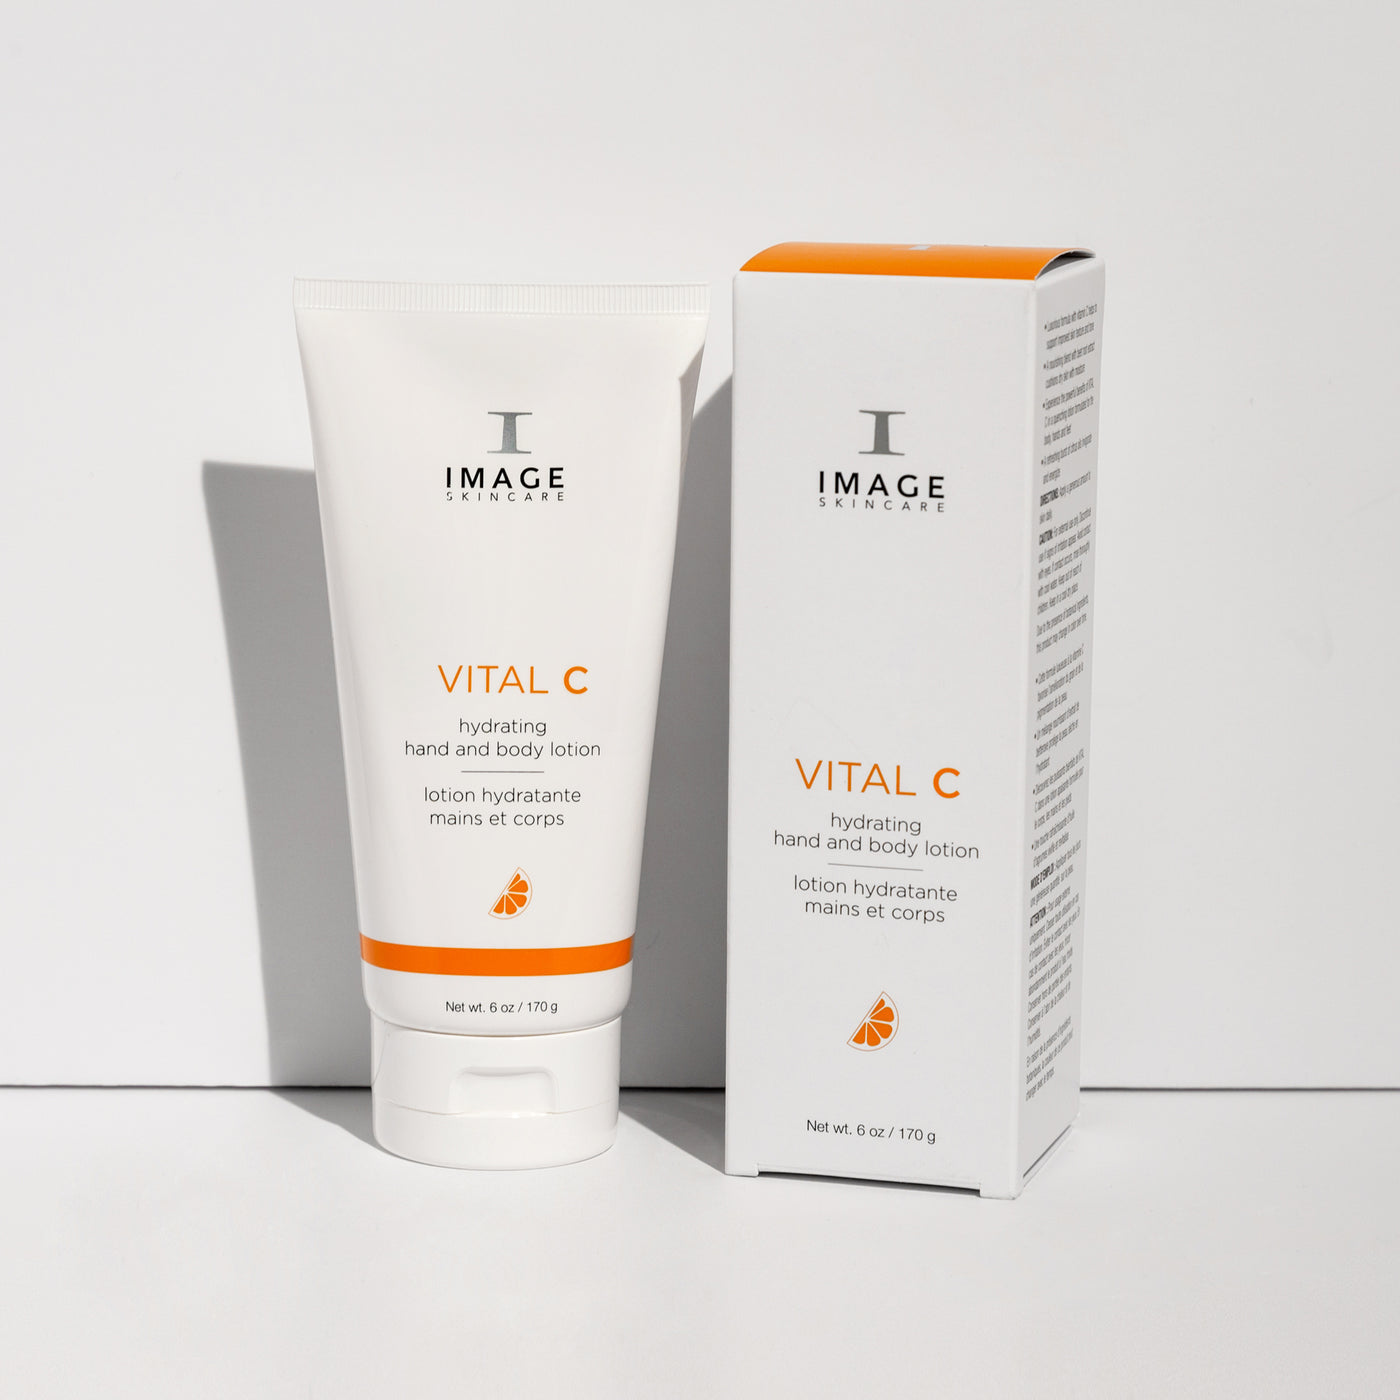 VITAL C Hydrating Hand and Body Lotion (6 oz)